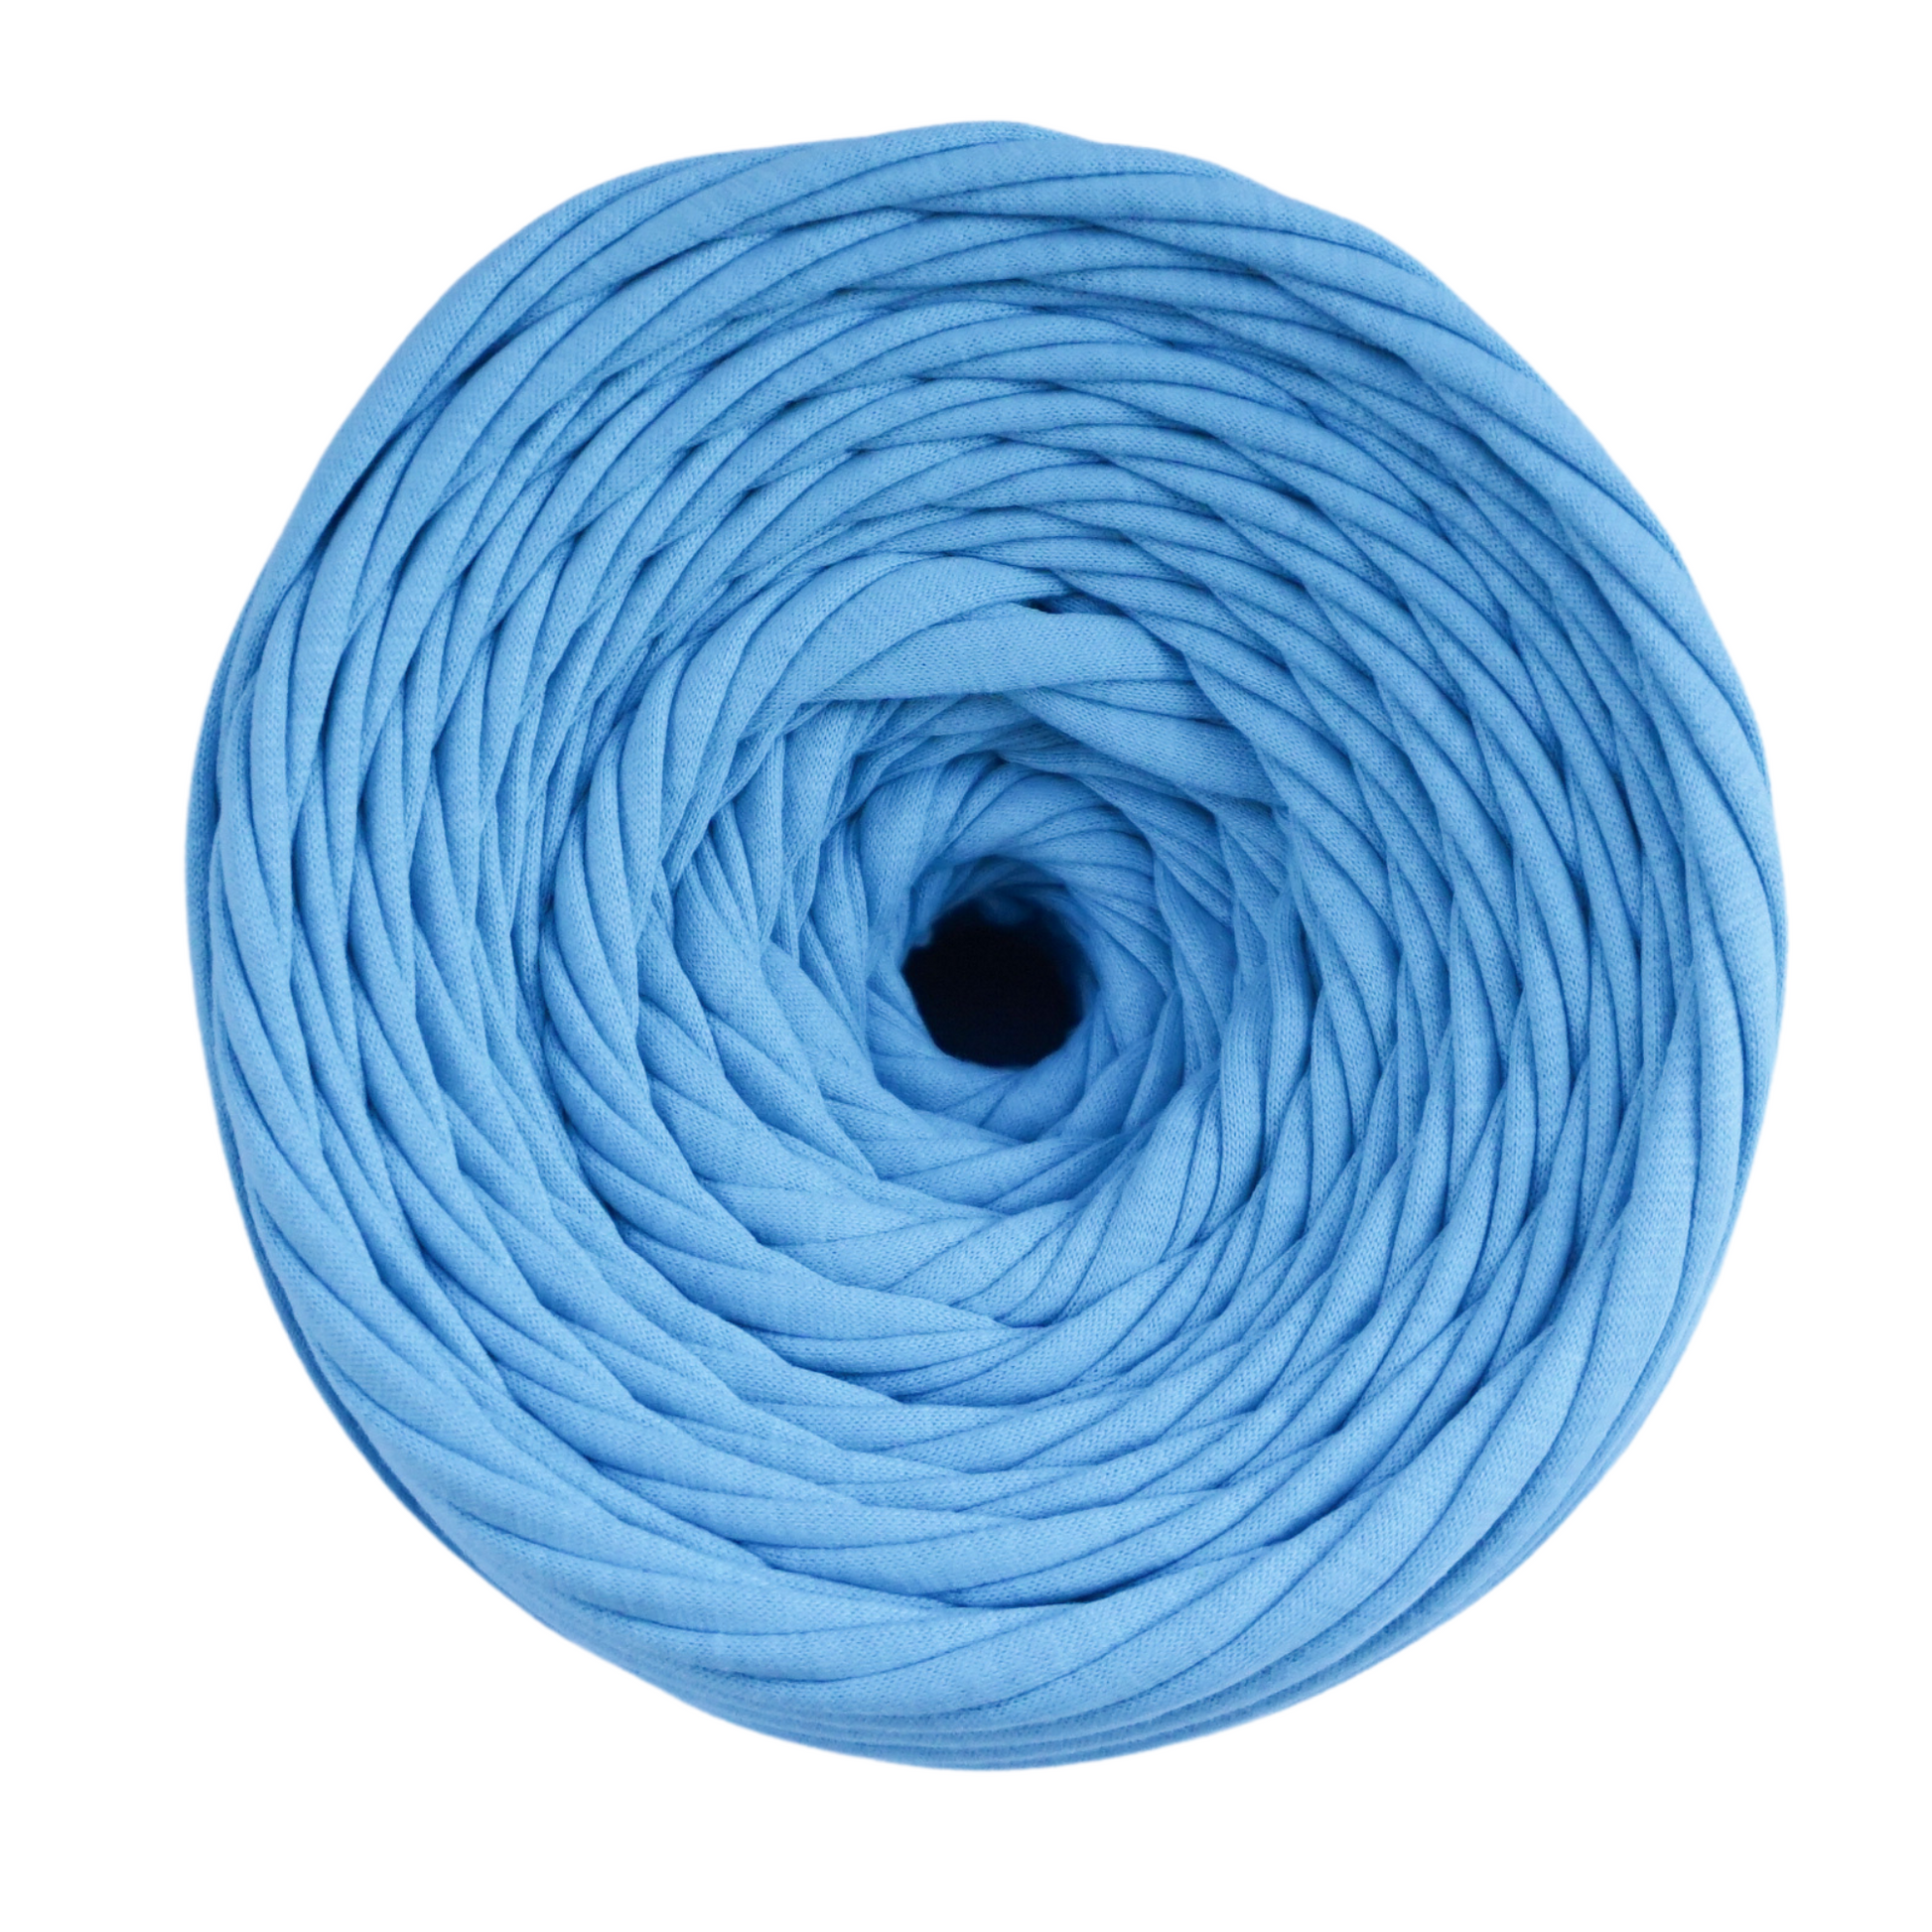 T-shirt yarn for crocheting baskets, bags, rugs and home decor